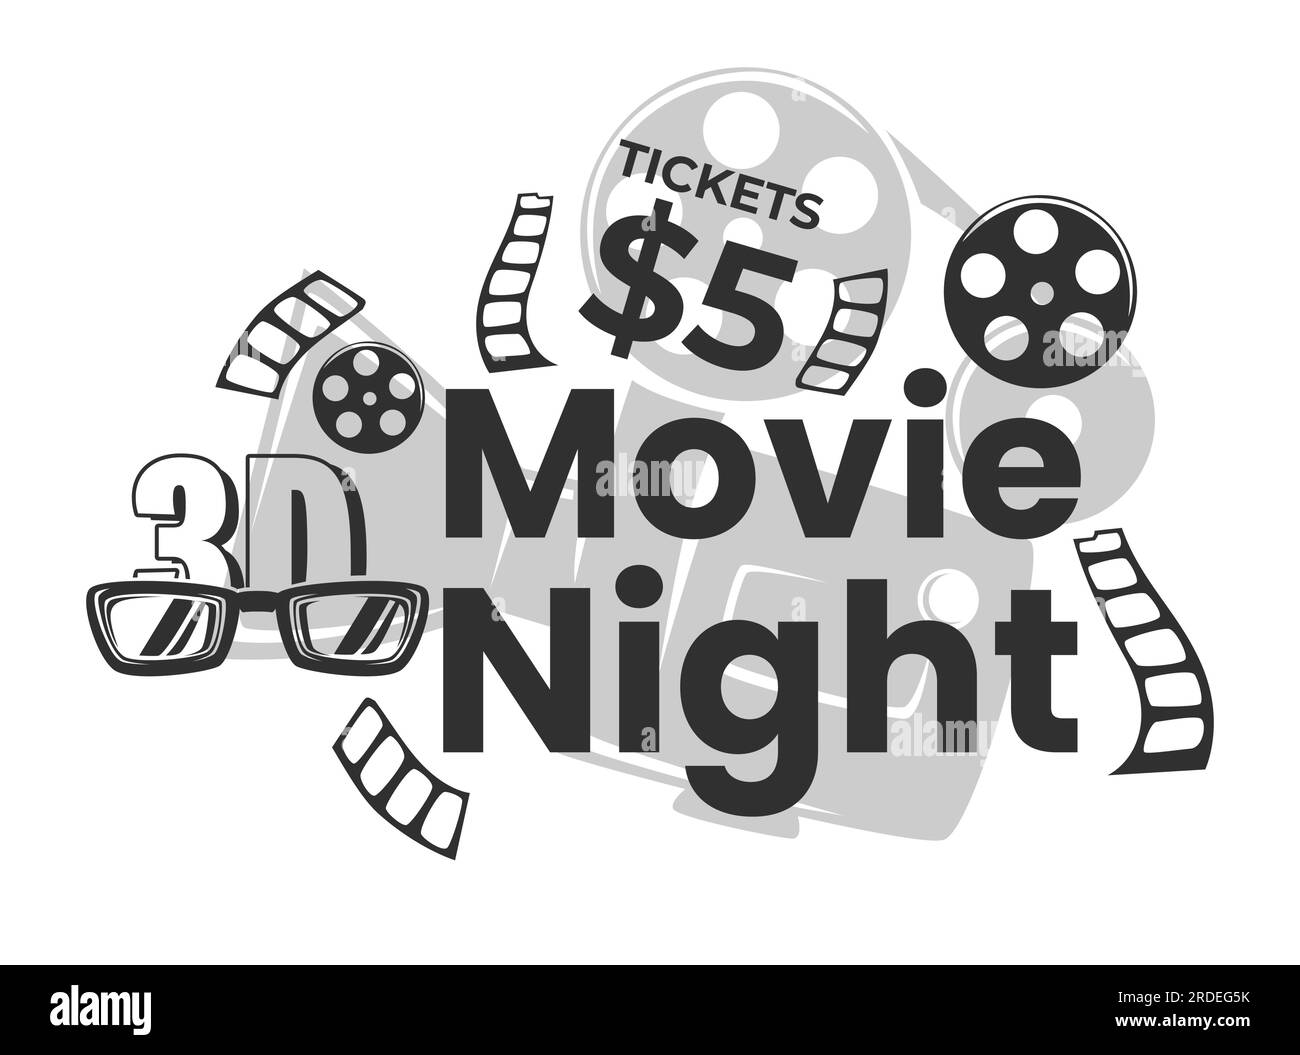 Movie night, admission and buying tickets vector Stock Vector